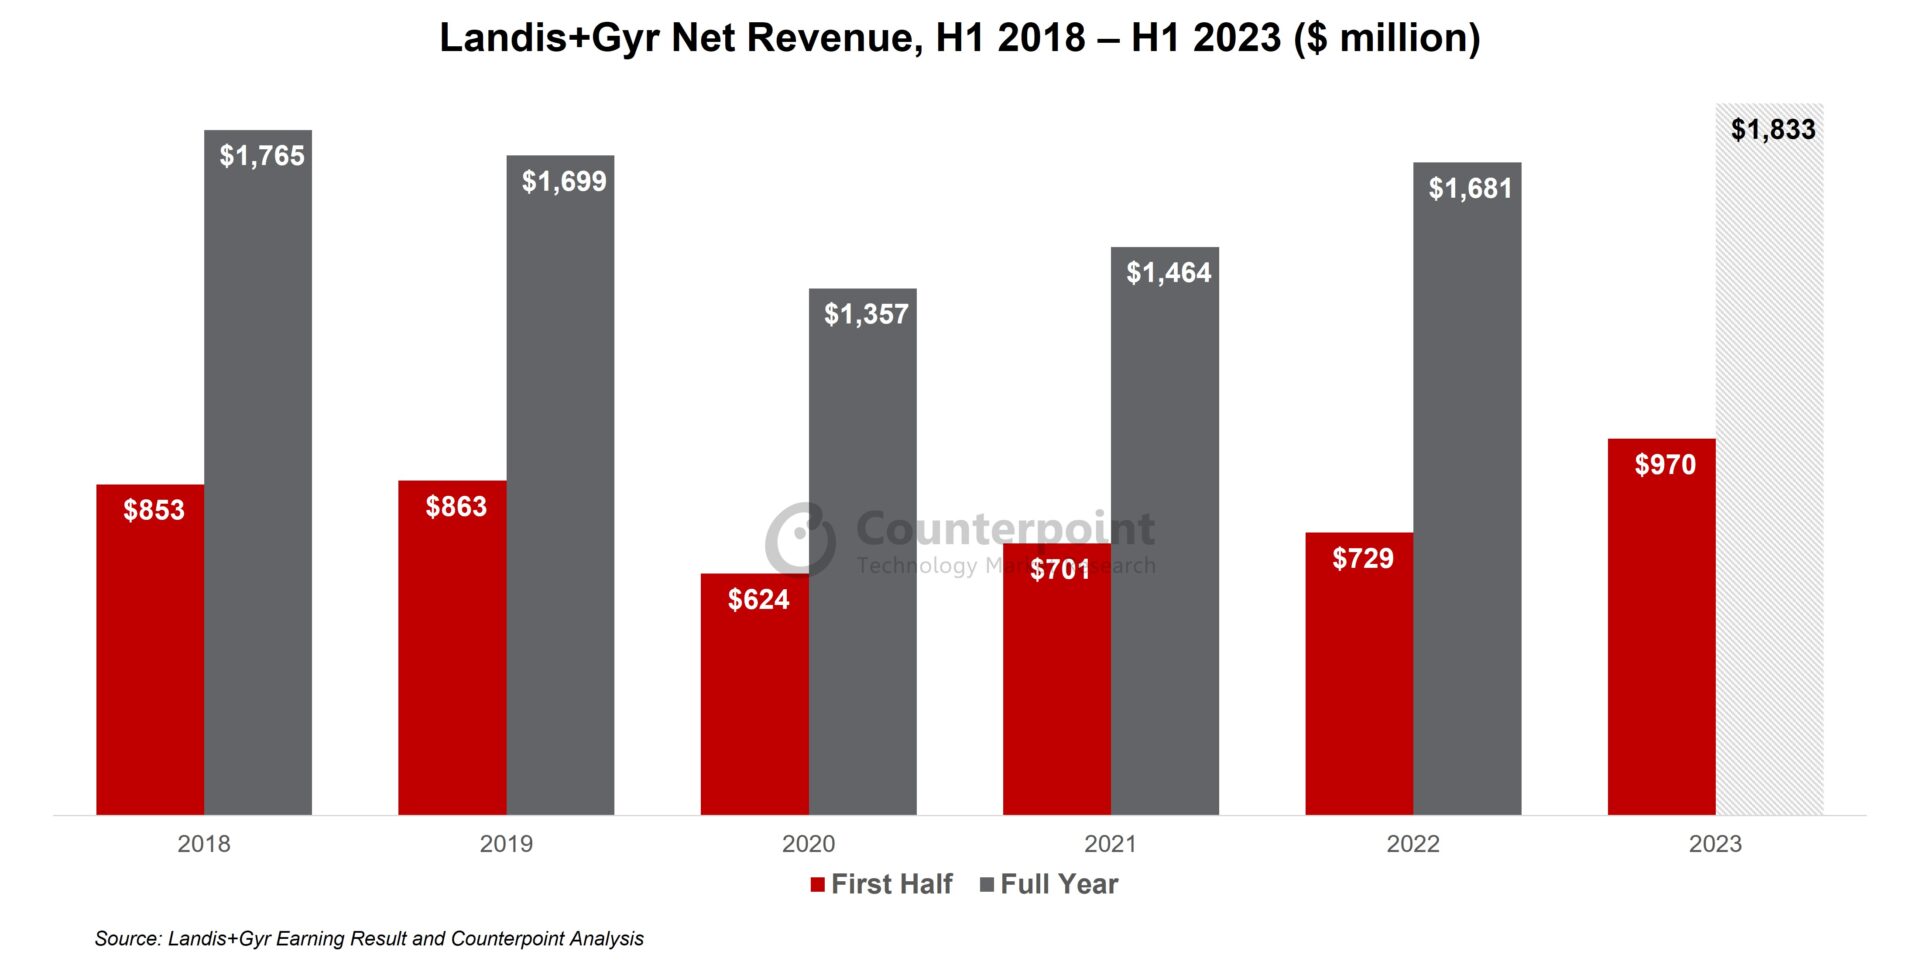 A graph showing Landis+Gyr Net Revenue in H1 2018 compared with H1 2023